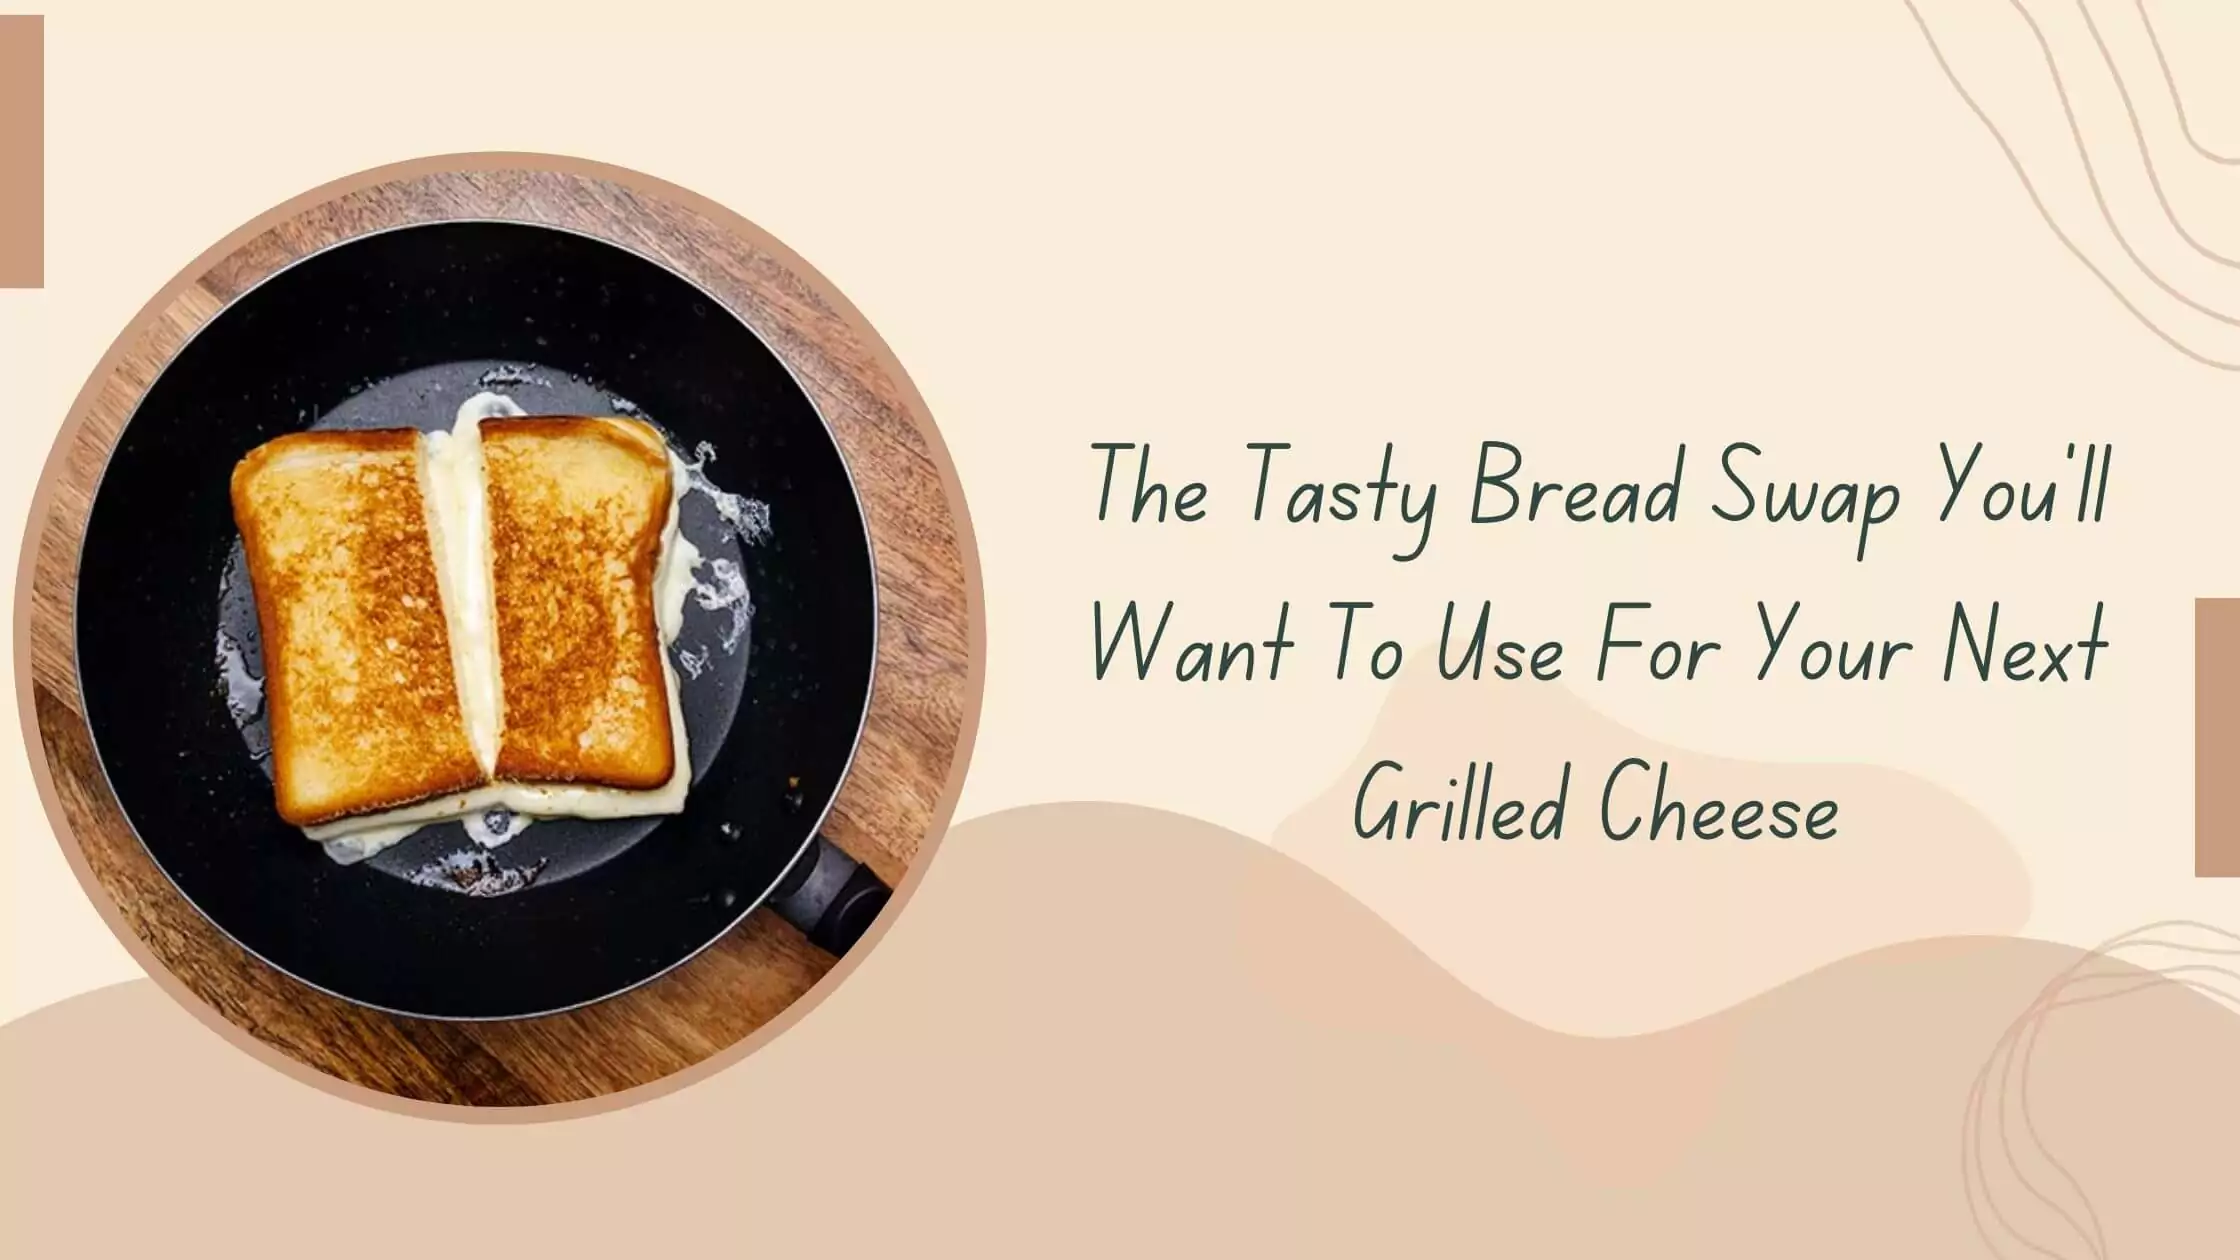 The Tasty Bread Swap You'll Want To Use For Your Next Grilled Cheese